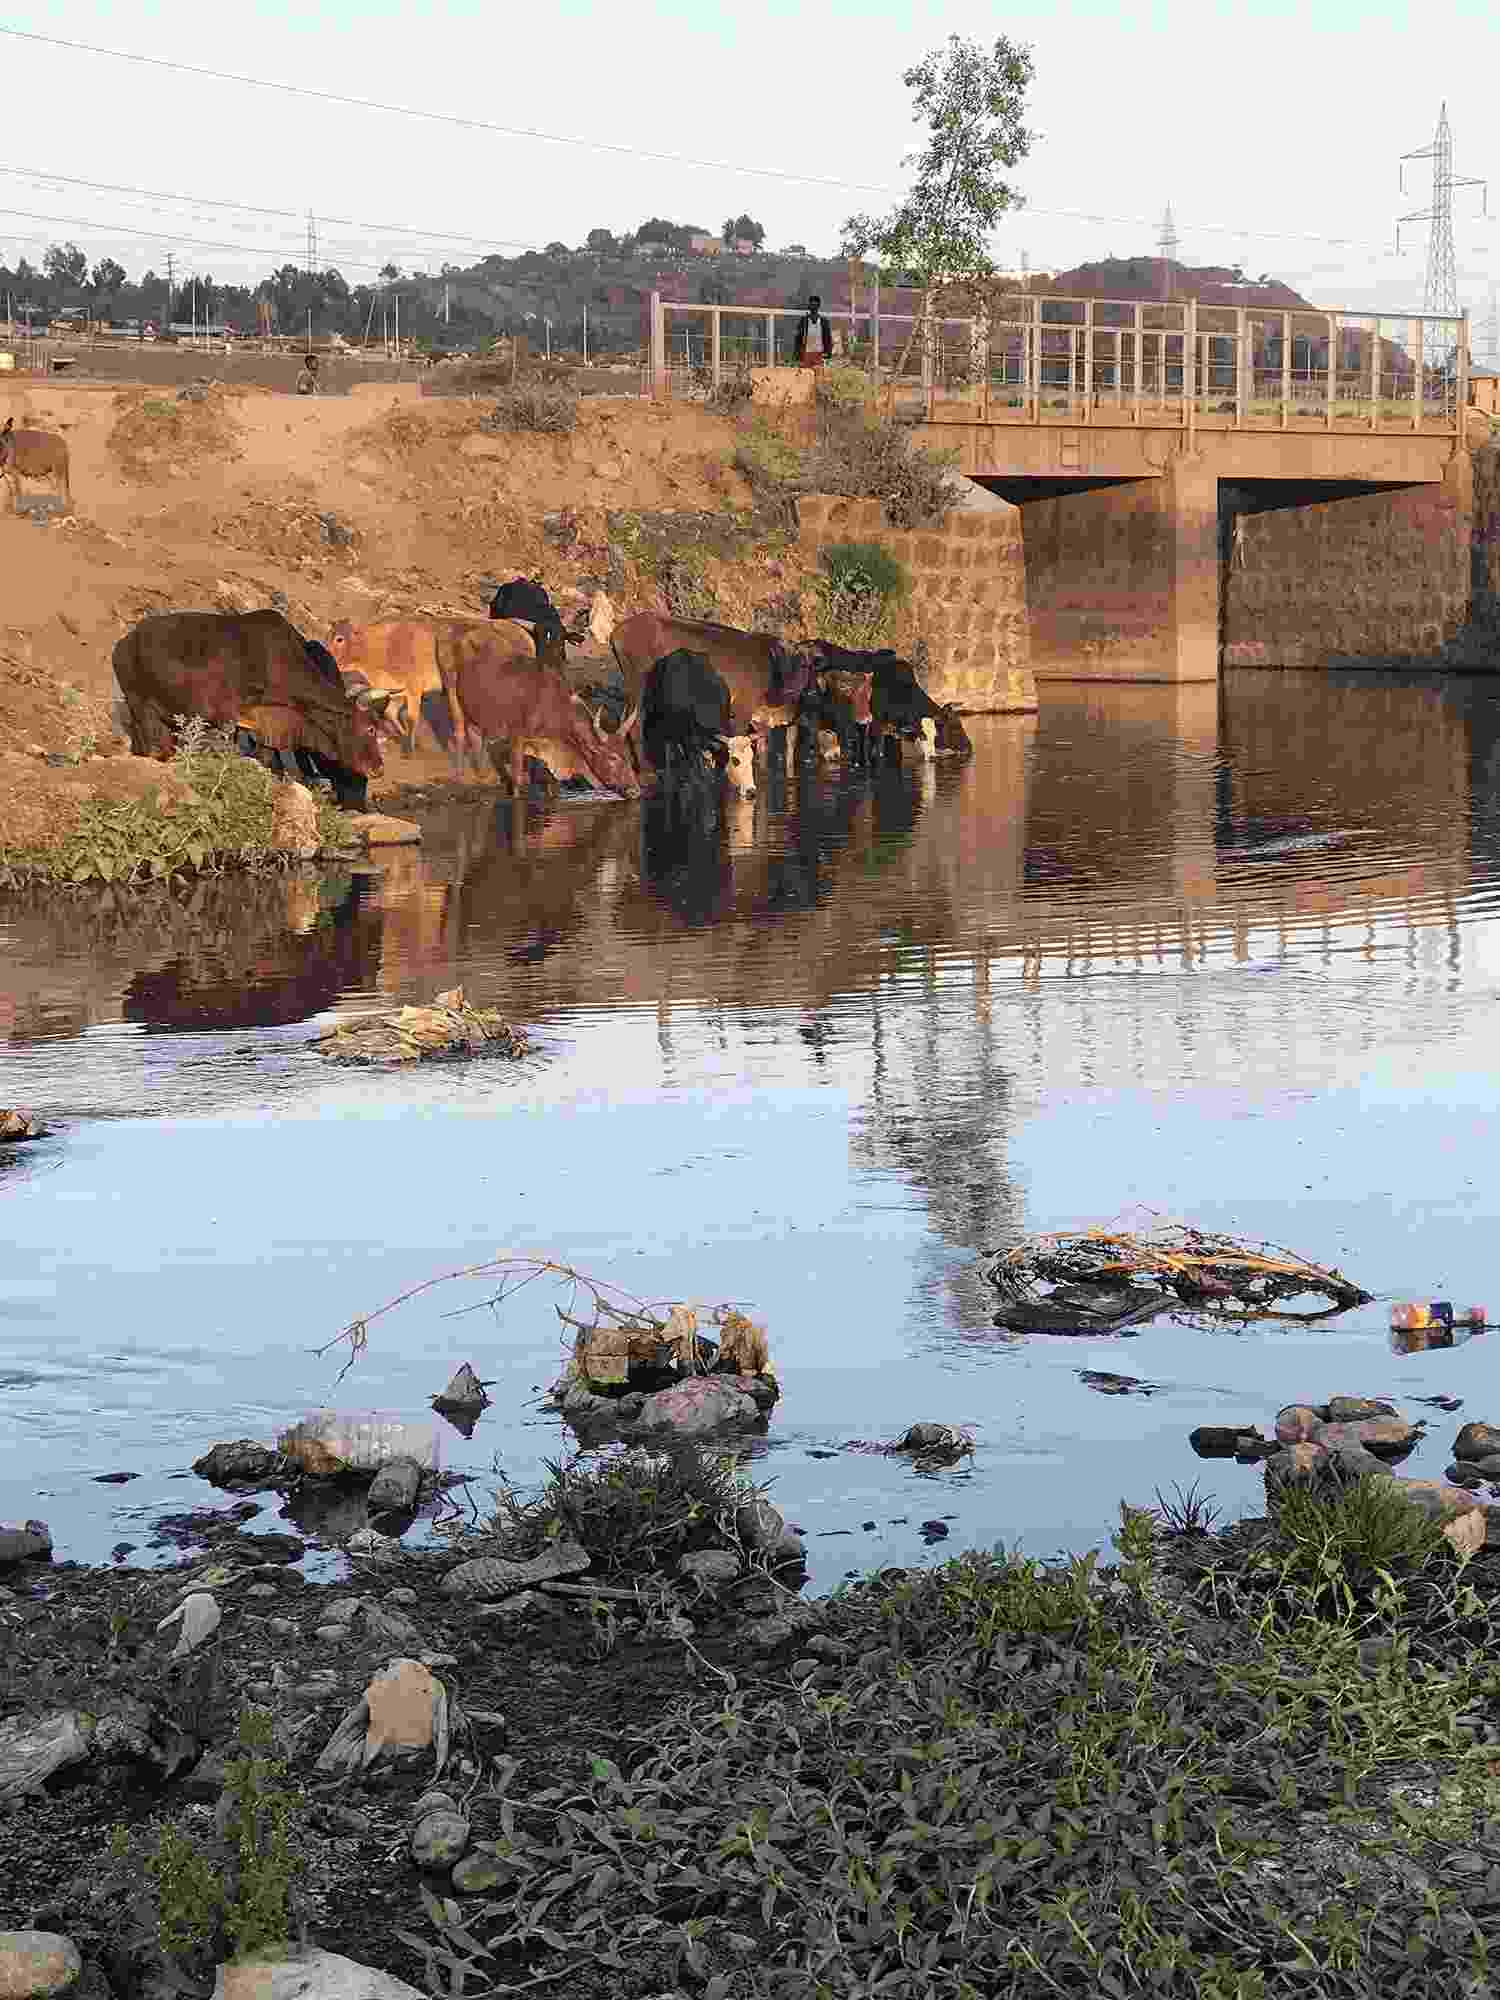 Image shows brown and black cattle drinking on the banks of the Little Akaki River, with a bridge visible behind